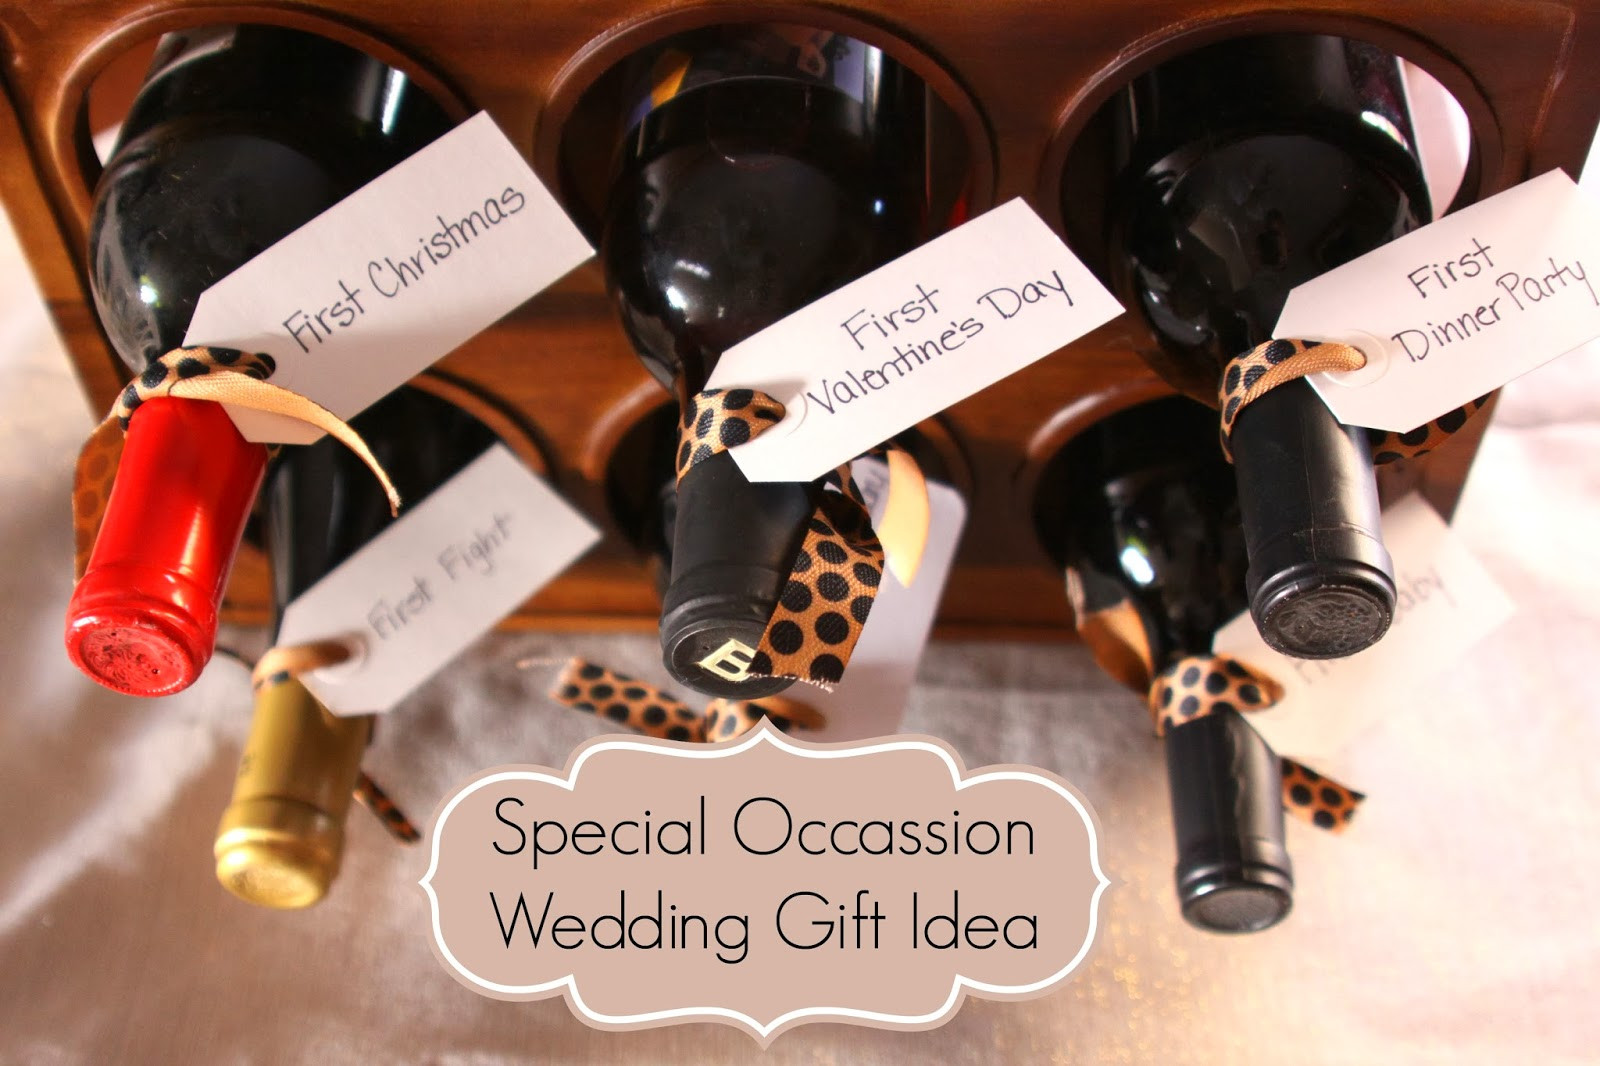 Wedding Gift Ideas Target
 Our Pinteresting Family Special Day Wedding Gift Idea